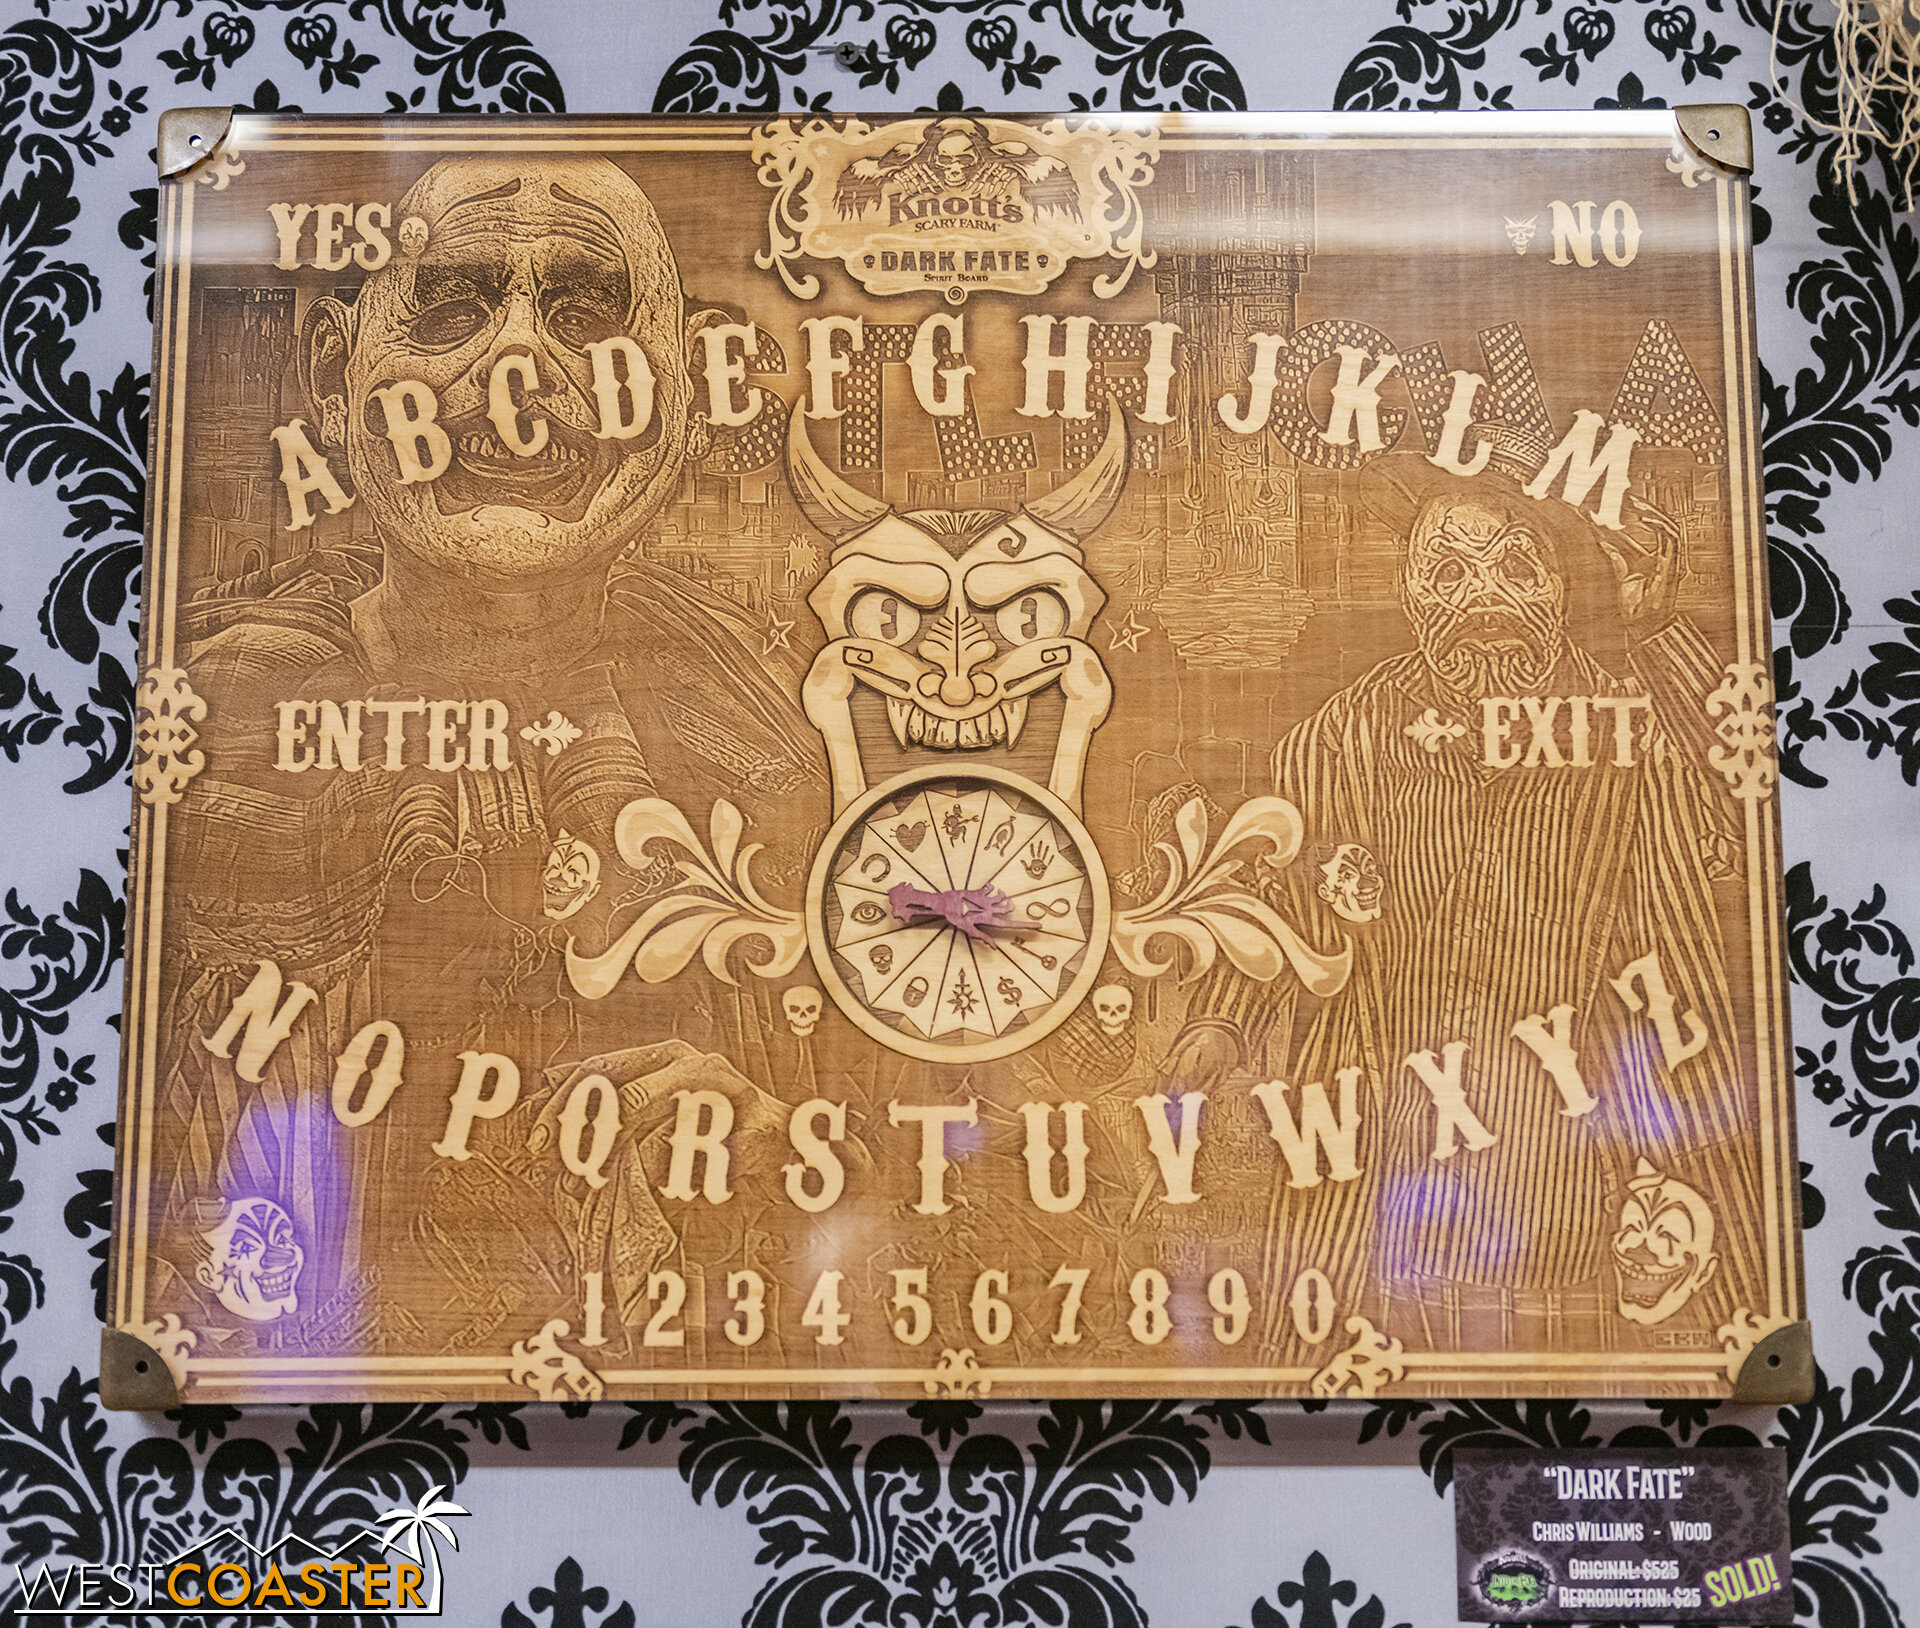  This Knott’s Ouija Board was amazing. 